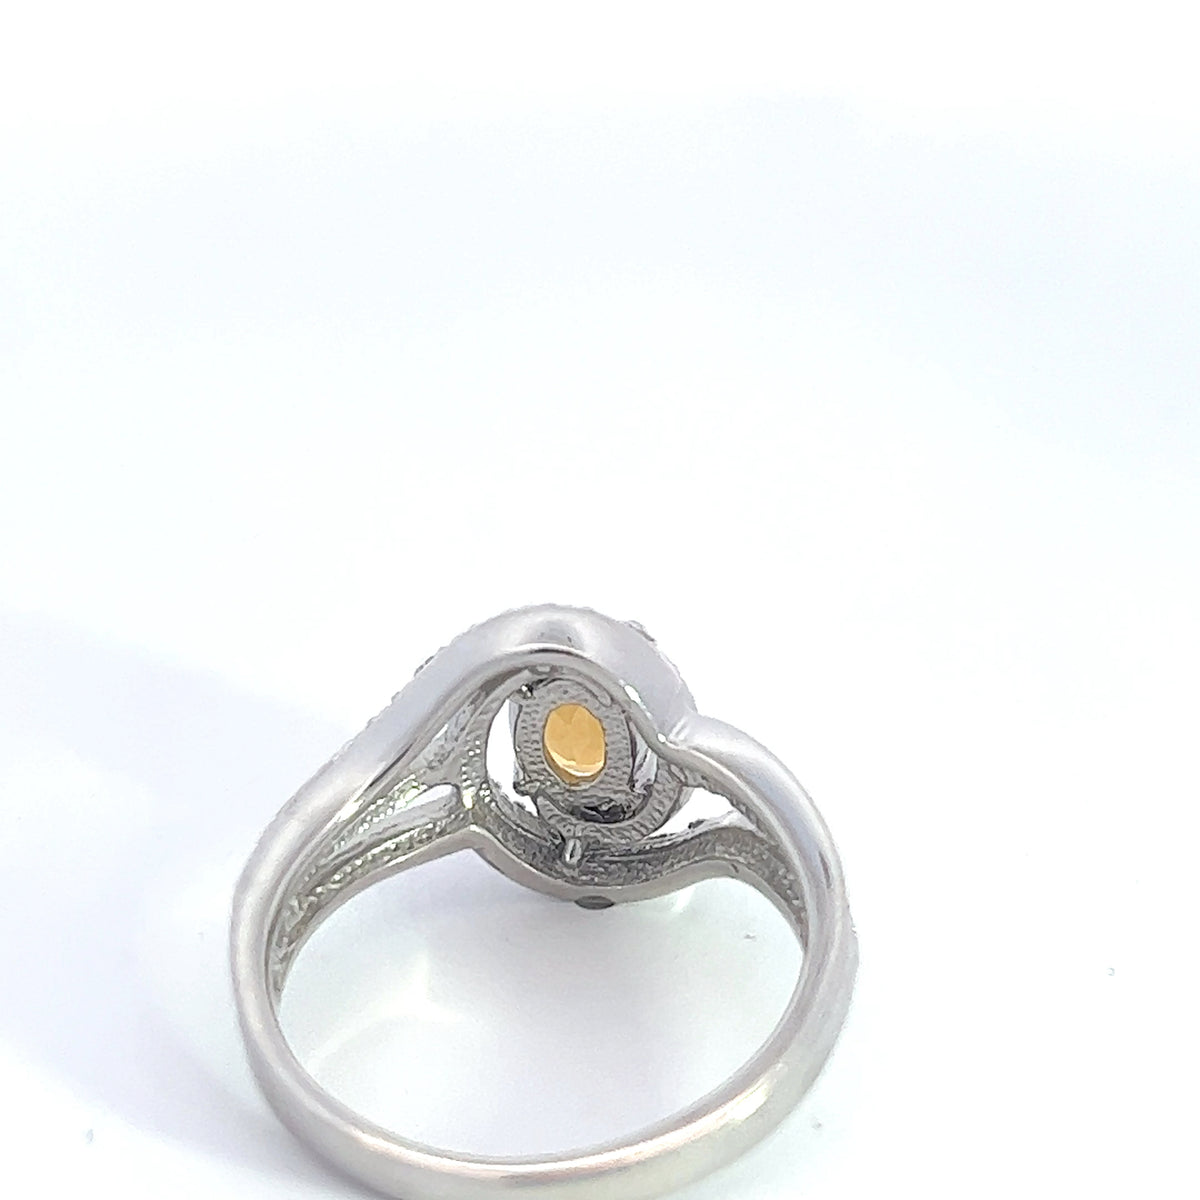 925 Sterling Silver 7 x 5mm Citrine and 0.03cttw Diamond Ring - Size 6